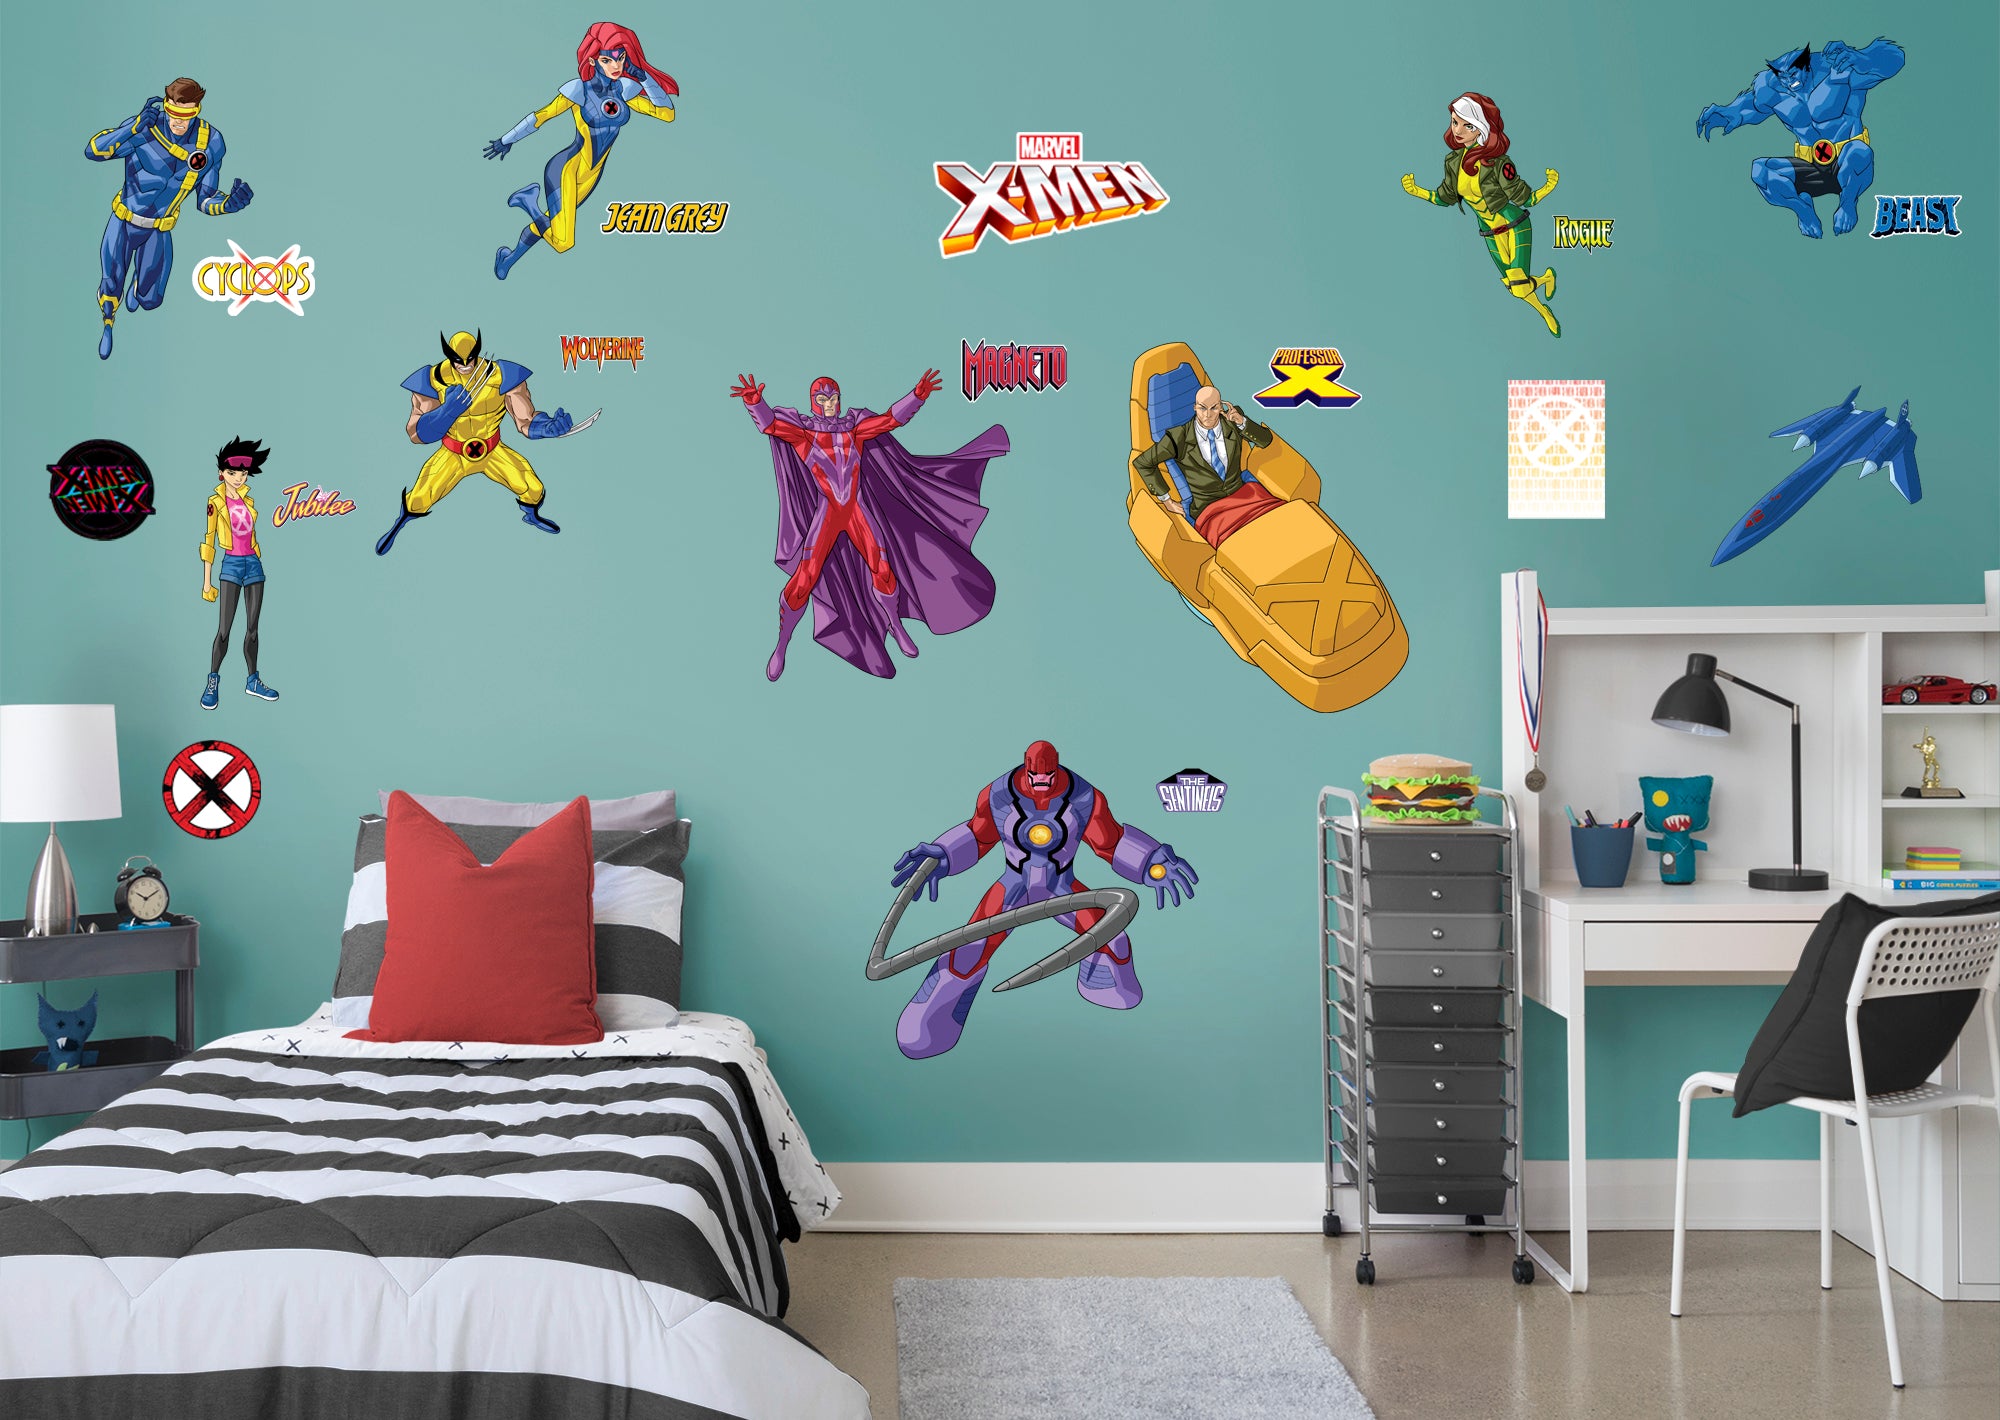 X-Men Character Collection - Officially Licensed Marvel Removable Wall Decal Collection (26"W x 25"H) by Fathead | Vinyl